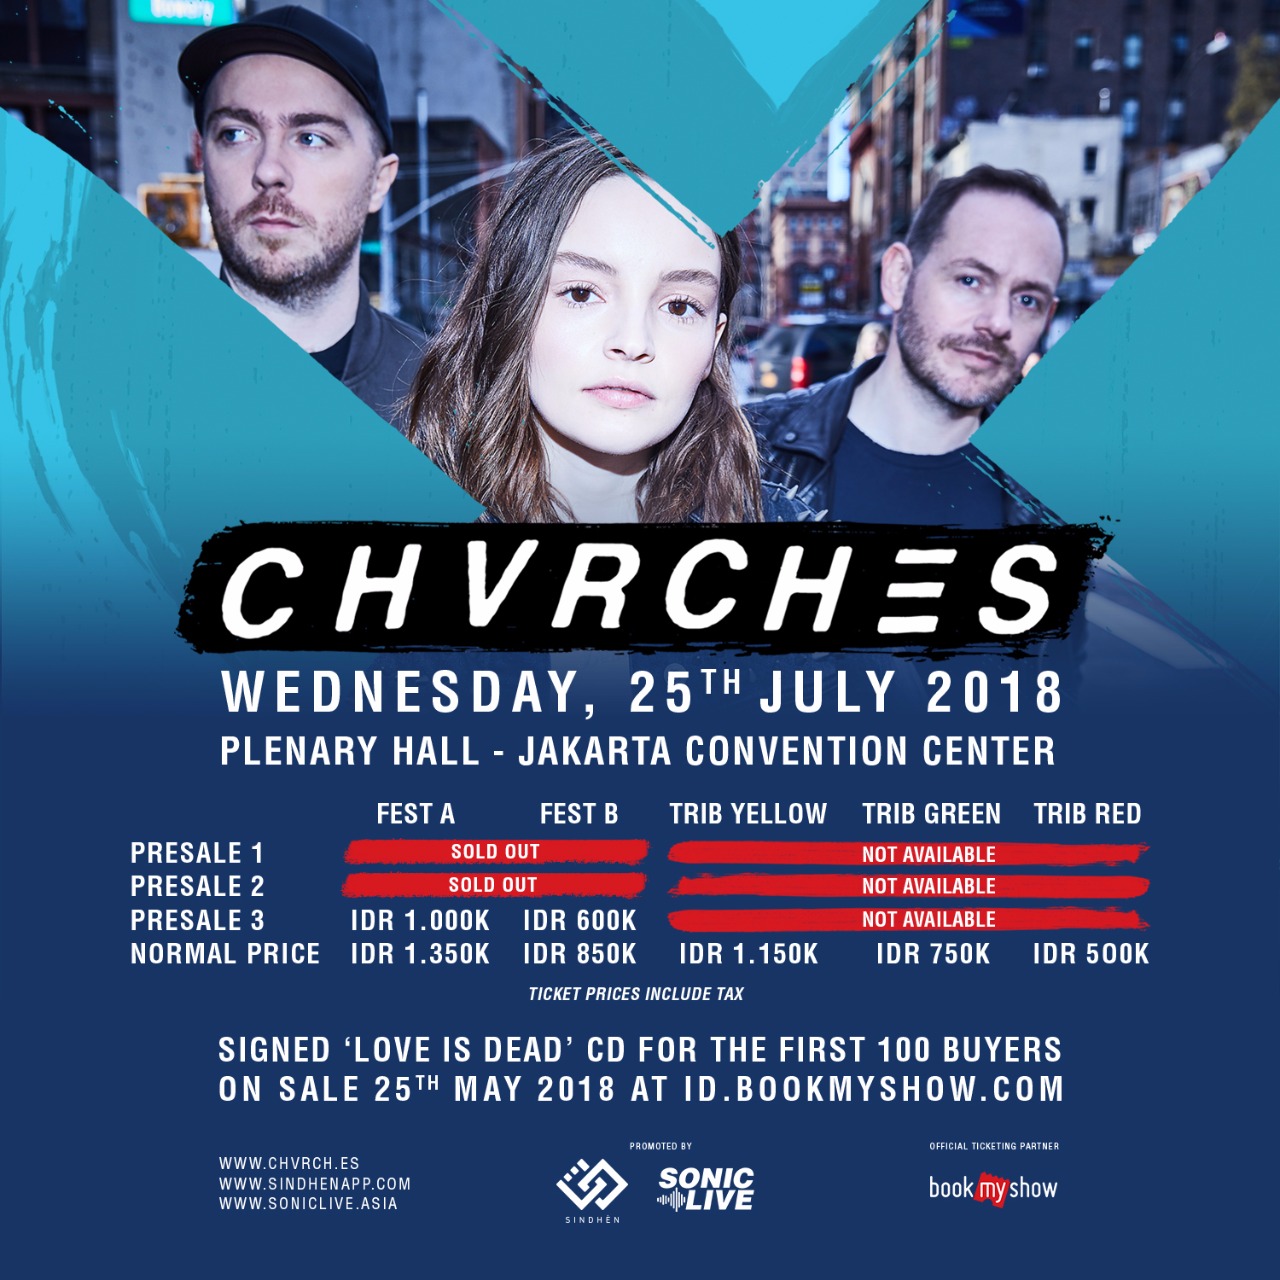 CHVRCHES ticket category